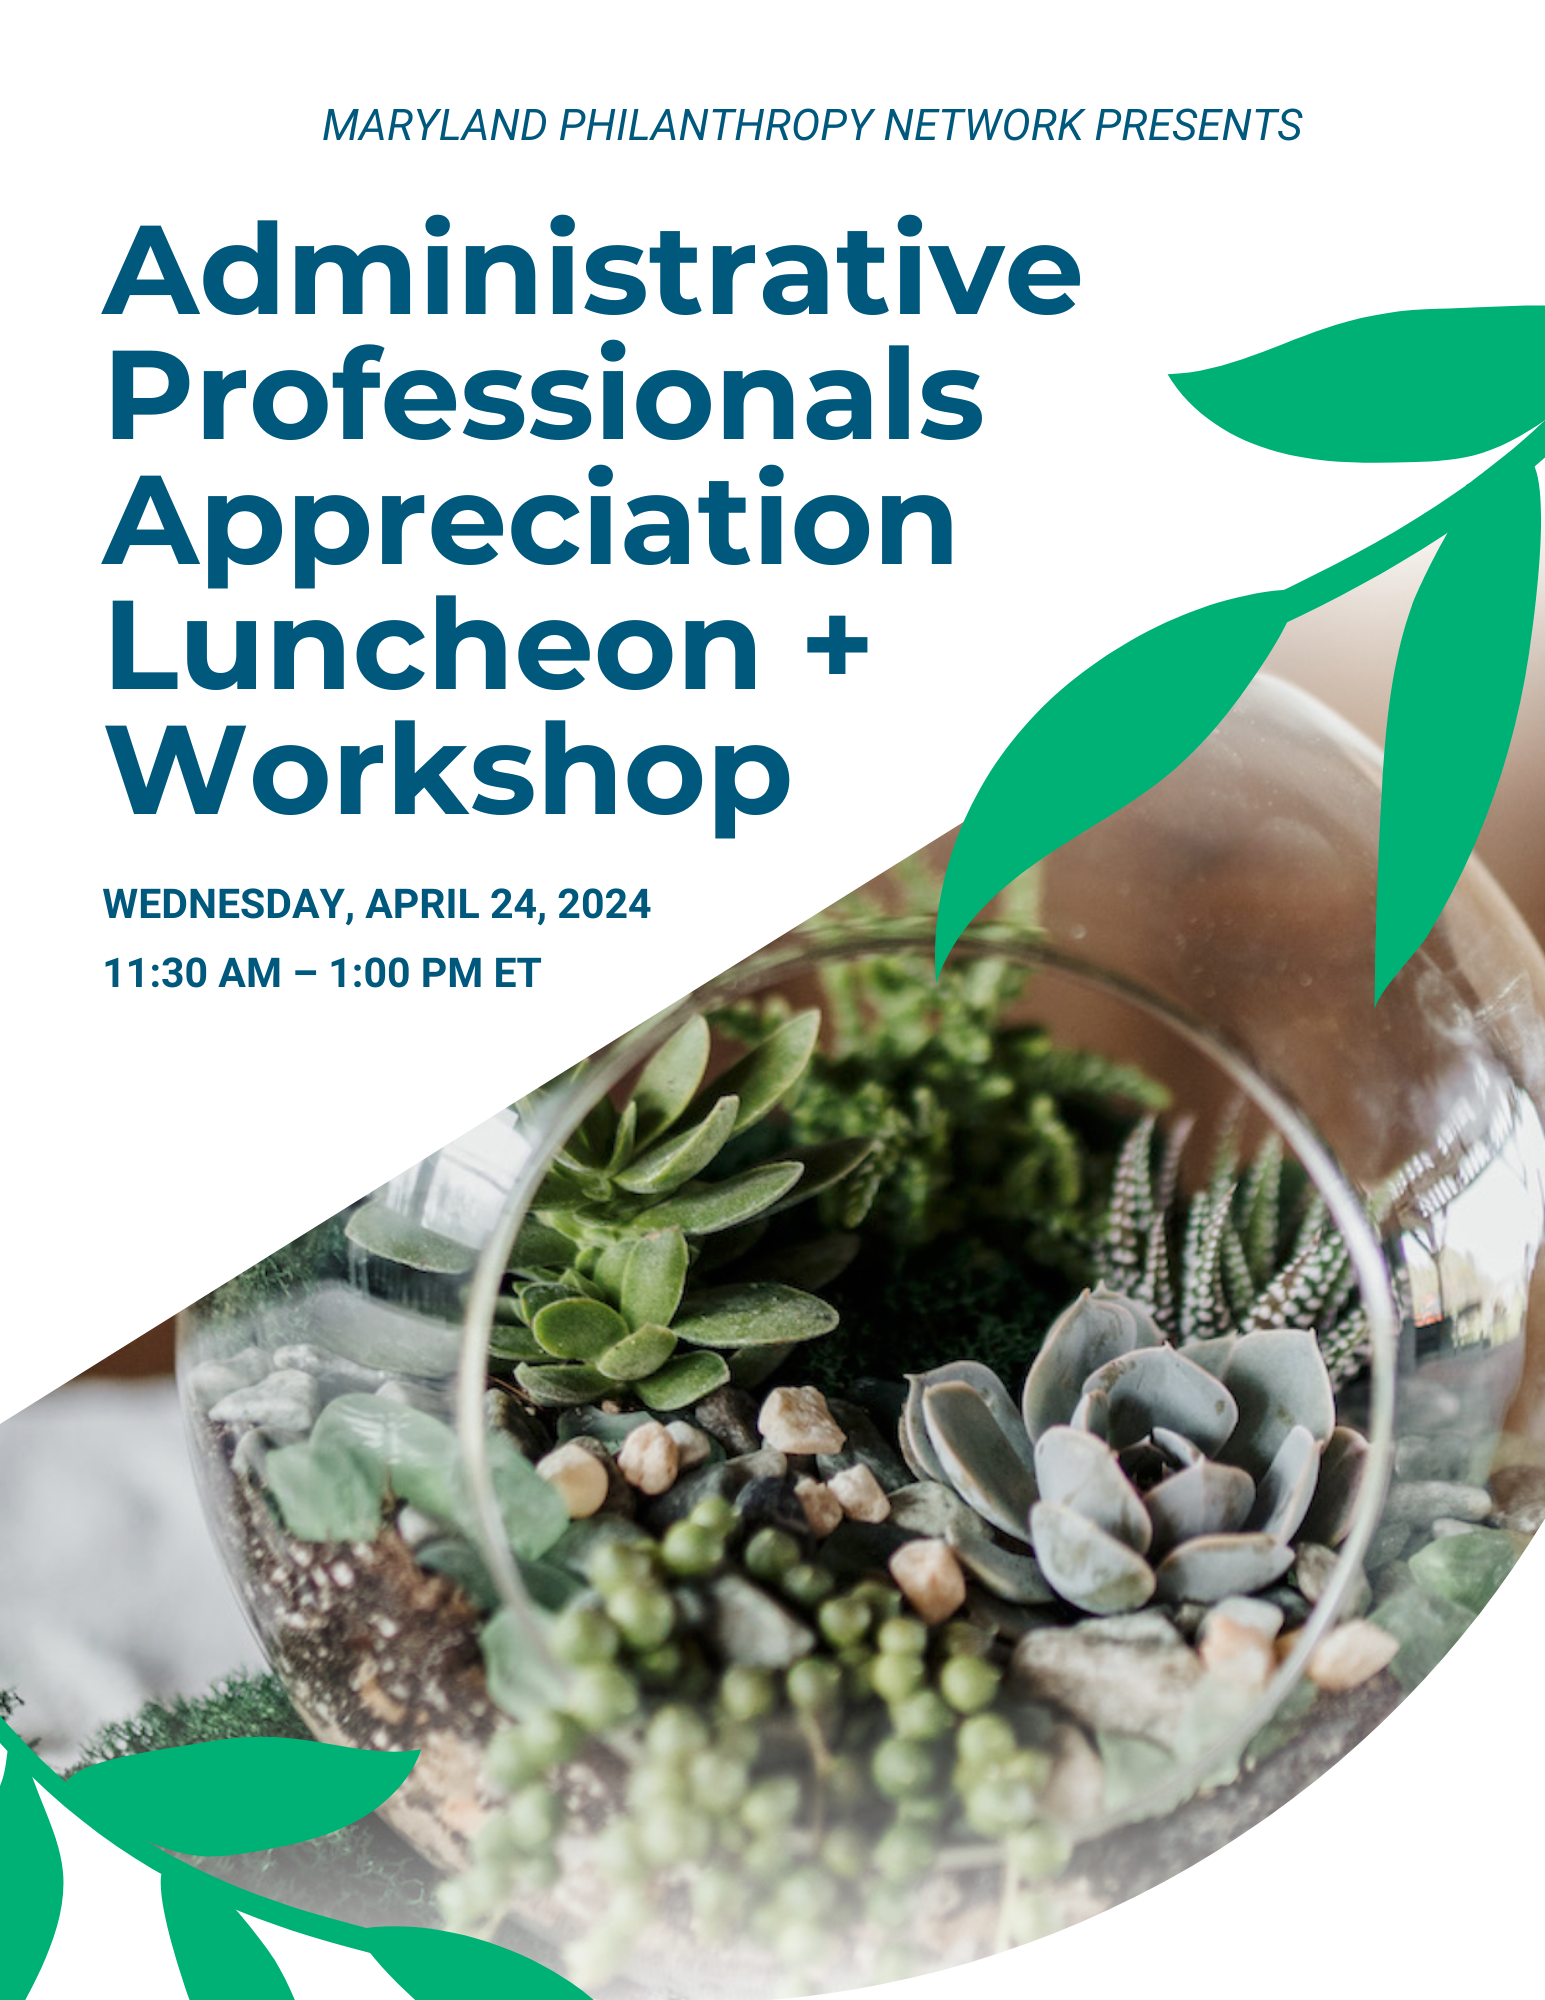 Maryland Philanthropy Network will celebrate all the administrative professionals in our network with a special luncheon and two-part workshop. Gather with your philanthropic peers to learn about  managing up, down, and across the organization .